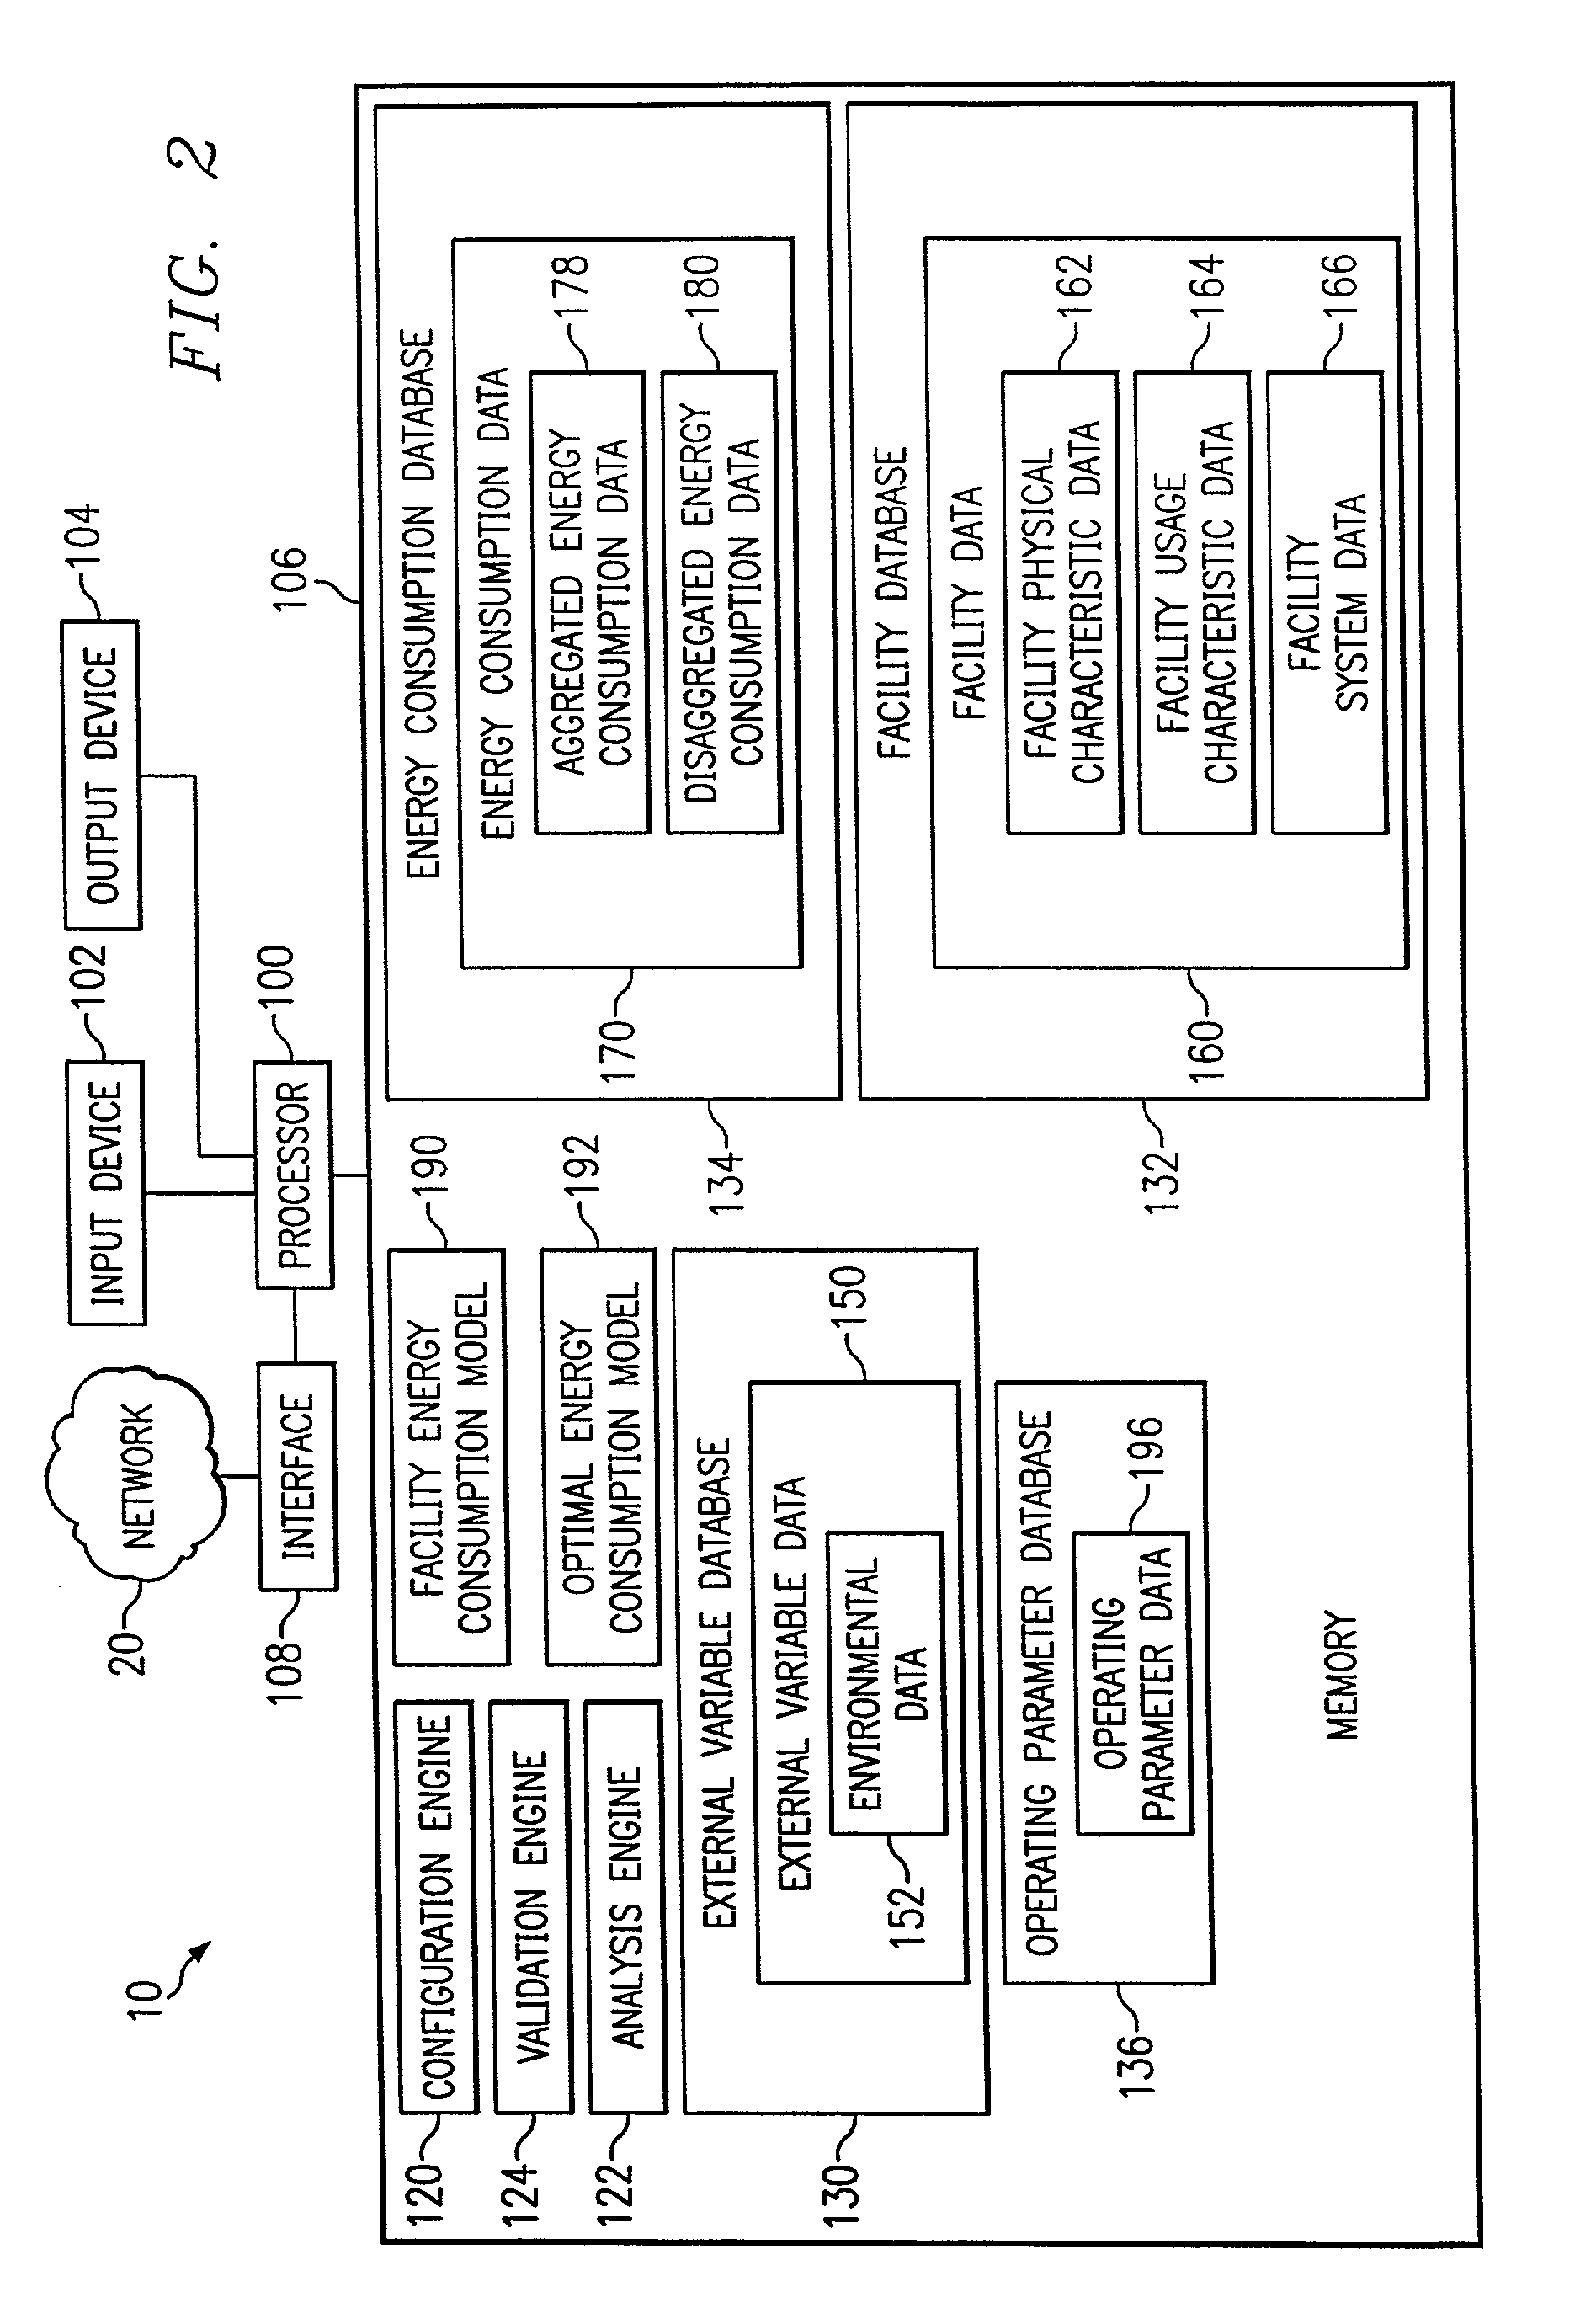 System and method for diagnostically evaluating energy consumption systems and components of a facility